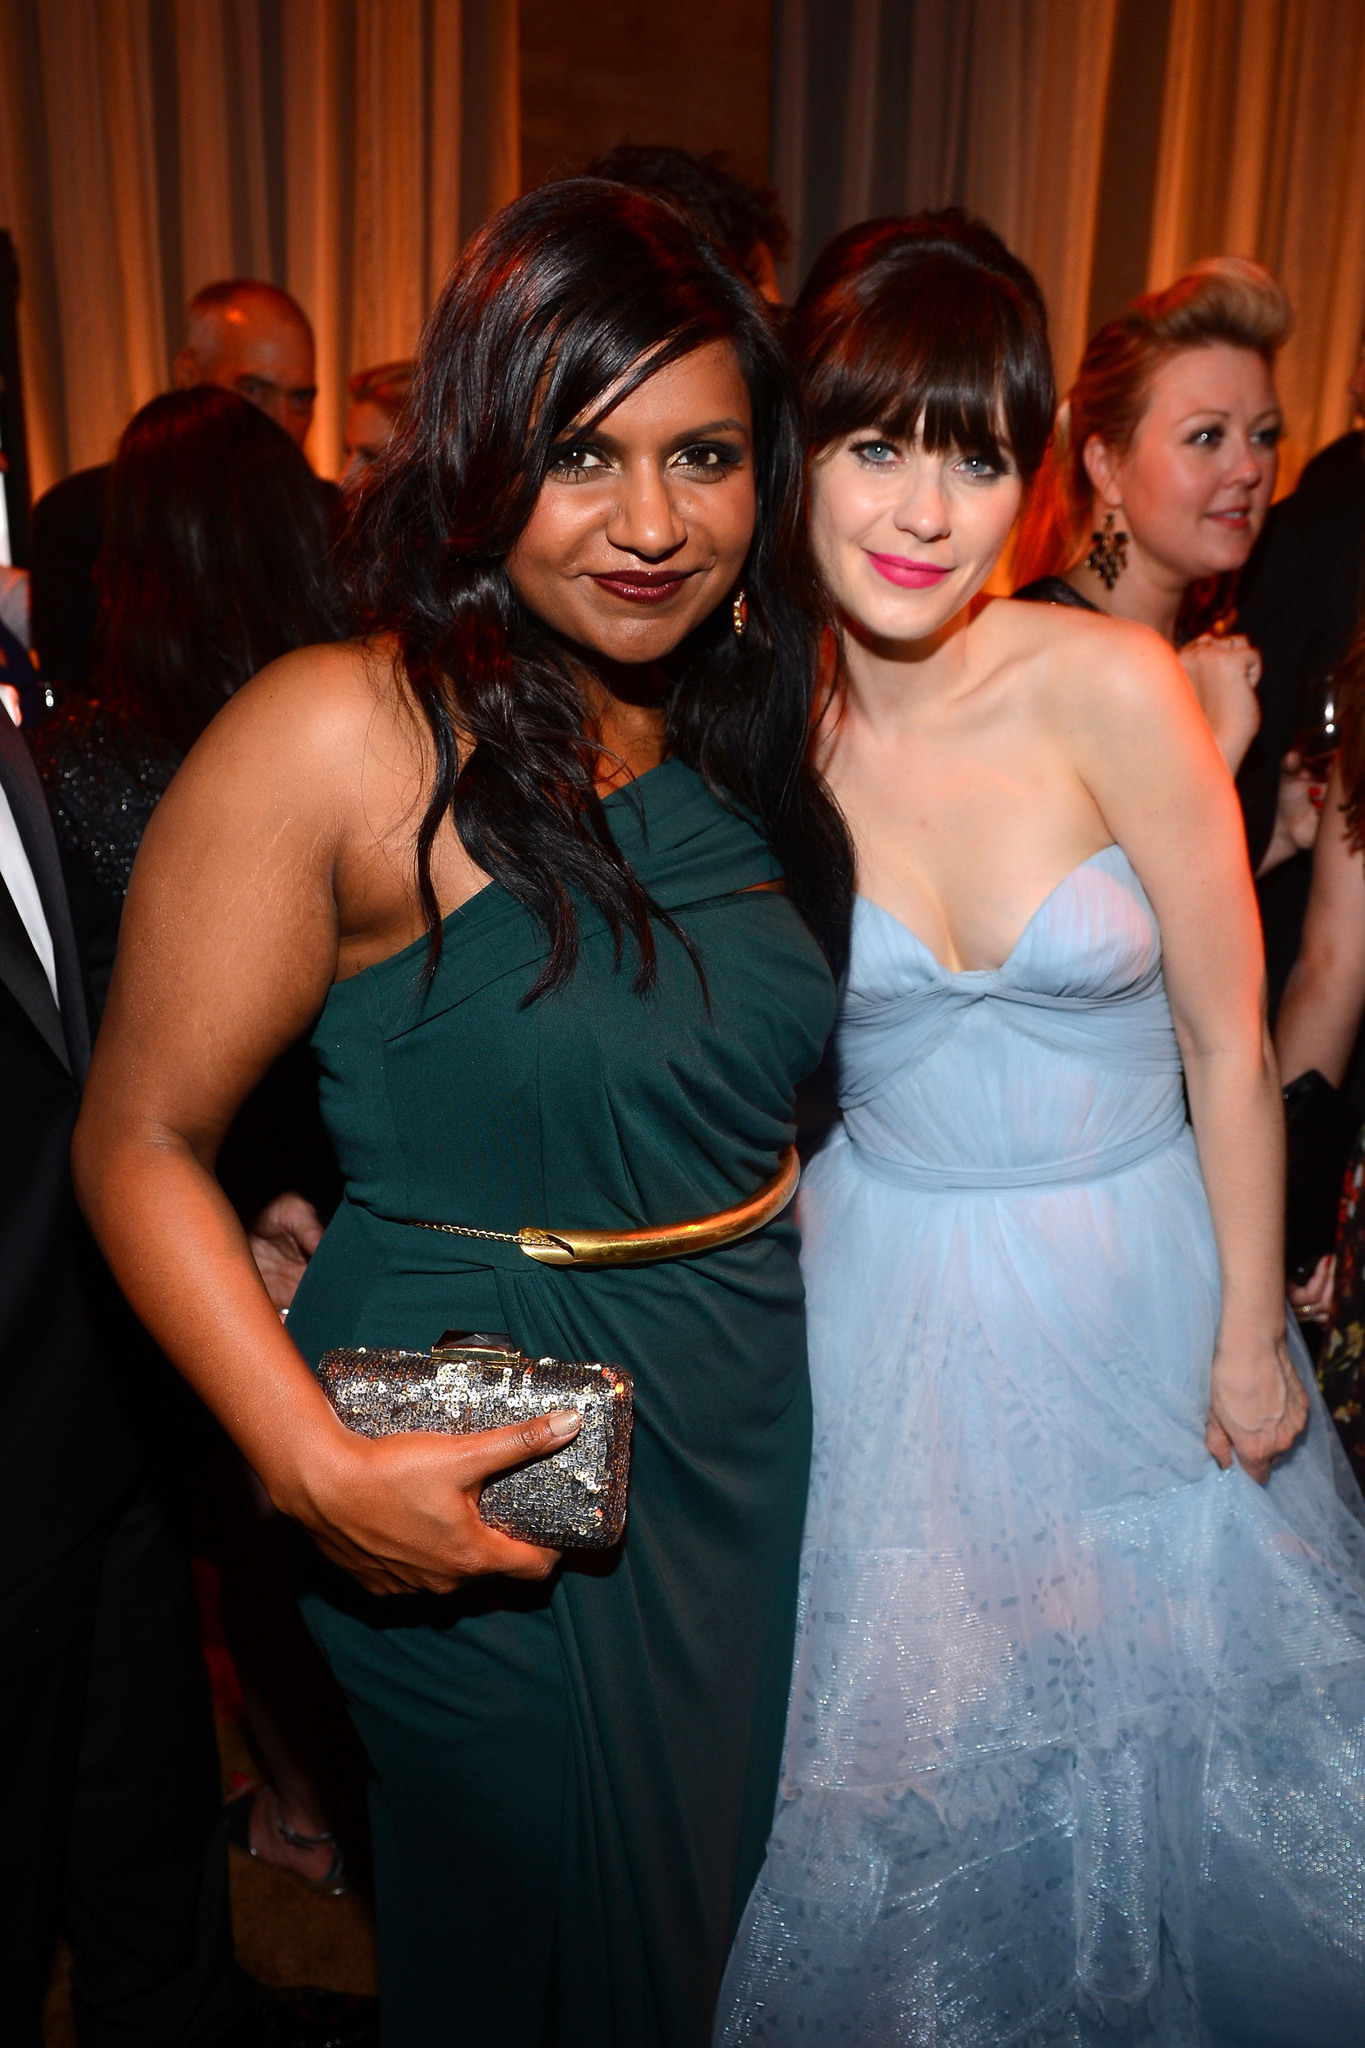 Zooey Deschanel and Mindy Kaling at event of The 64th Primetime Emmy Awards (2012)